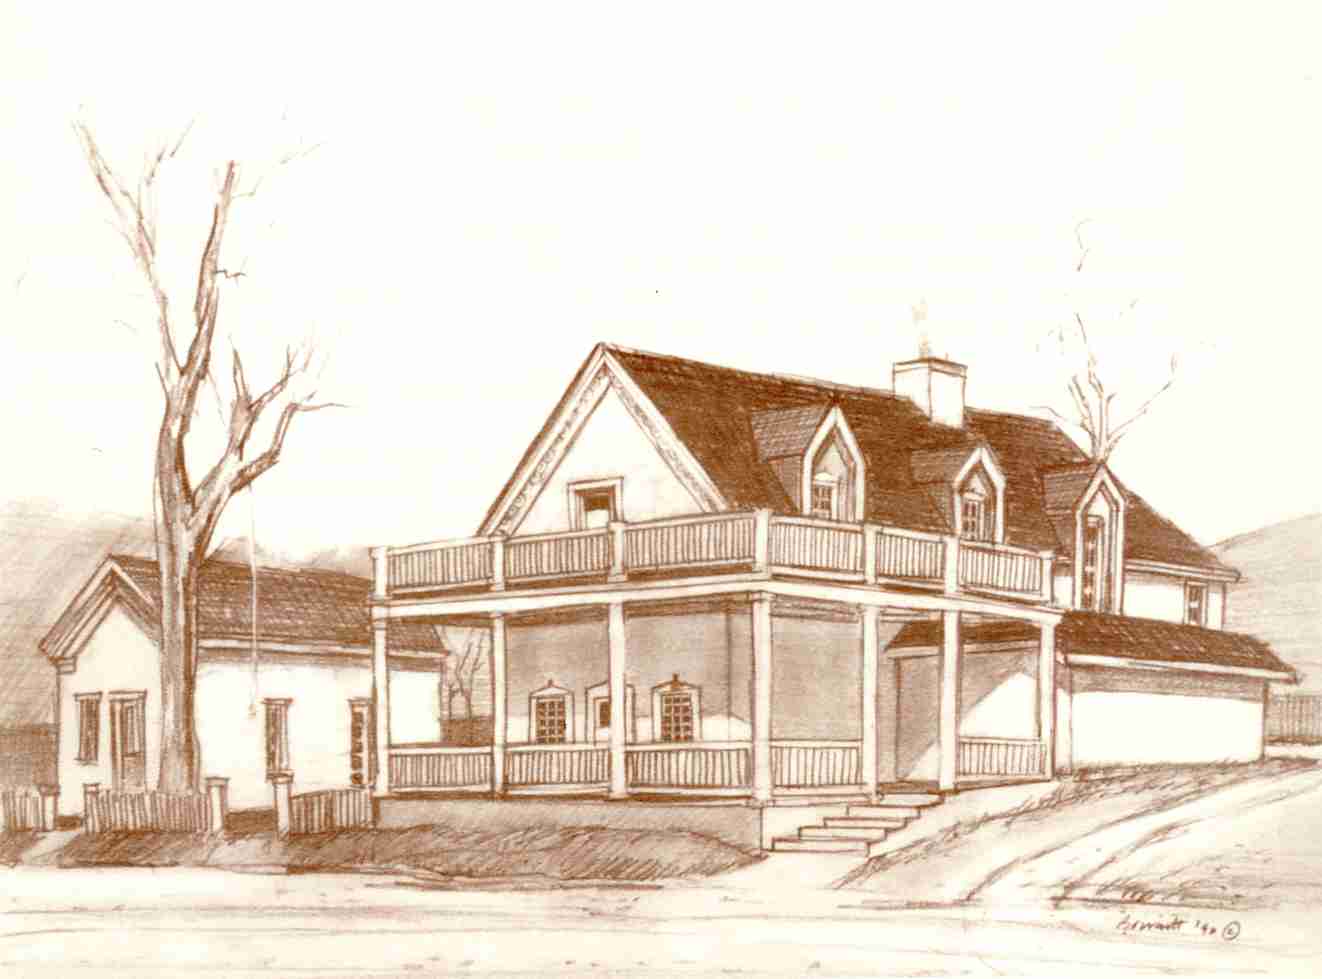 Sketch of the Hardy Home